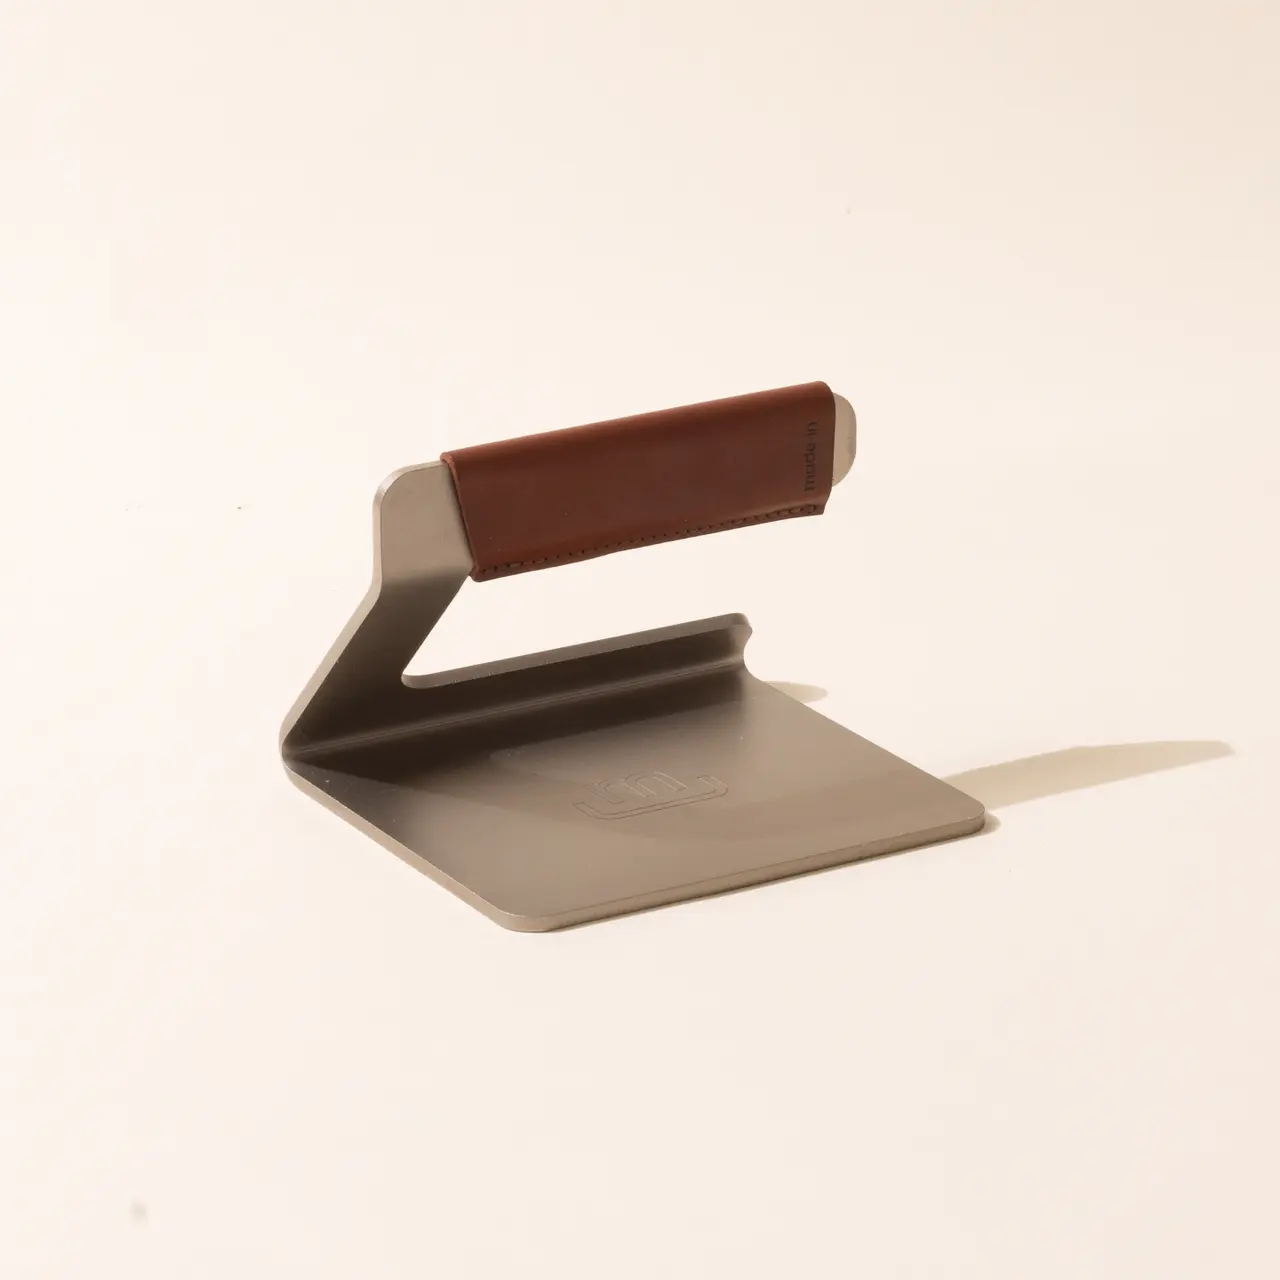 A minimalist metal bookend with a brown leather accent stands on a light background, casting a soft shadow.